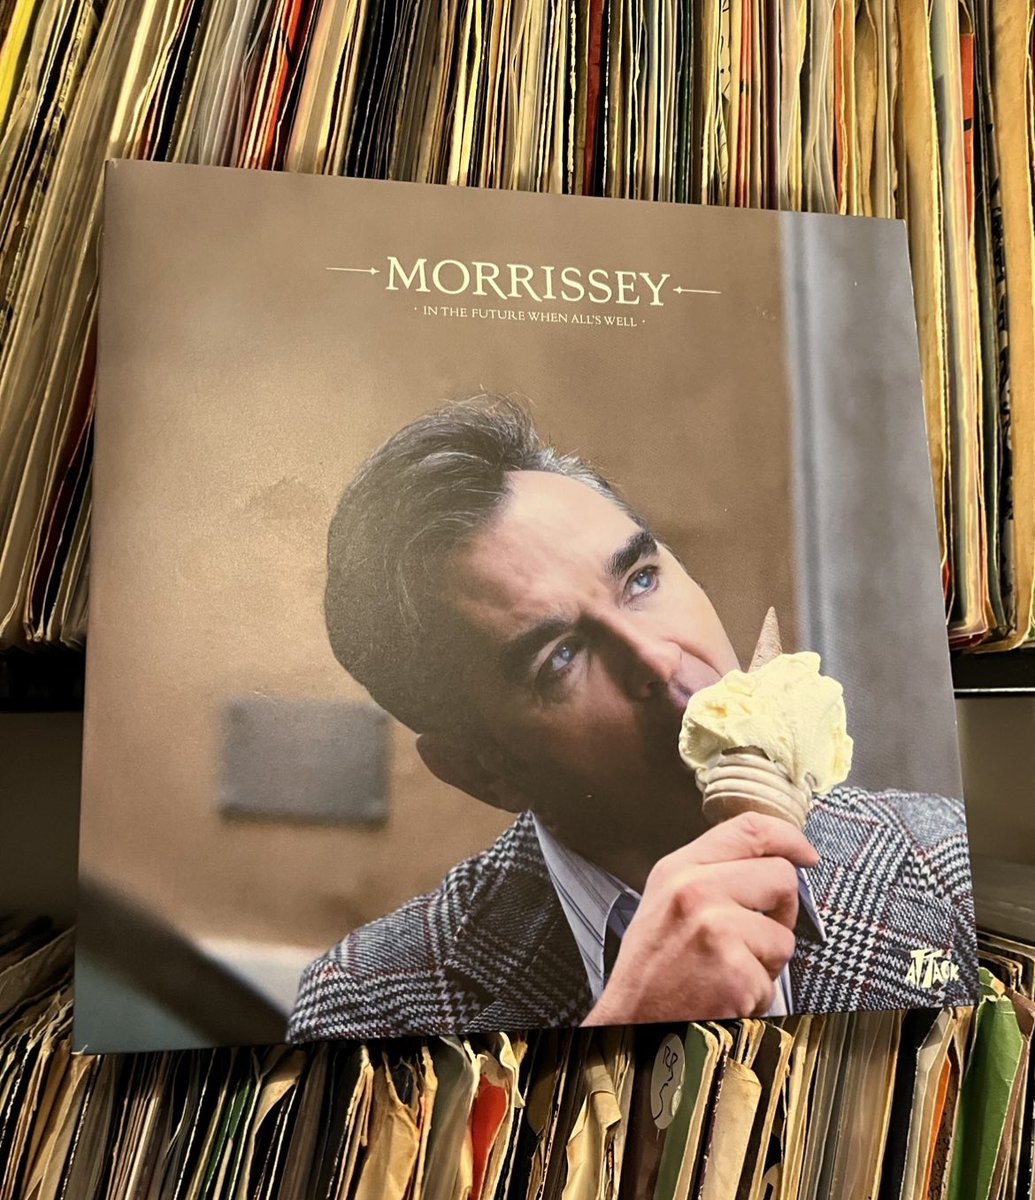 One of Morrissey’s lesser known singles from Ringleader. #morrissey